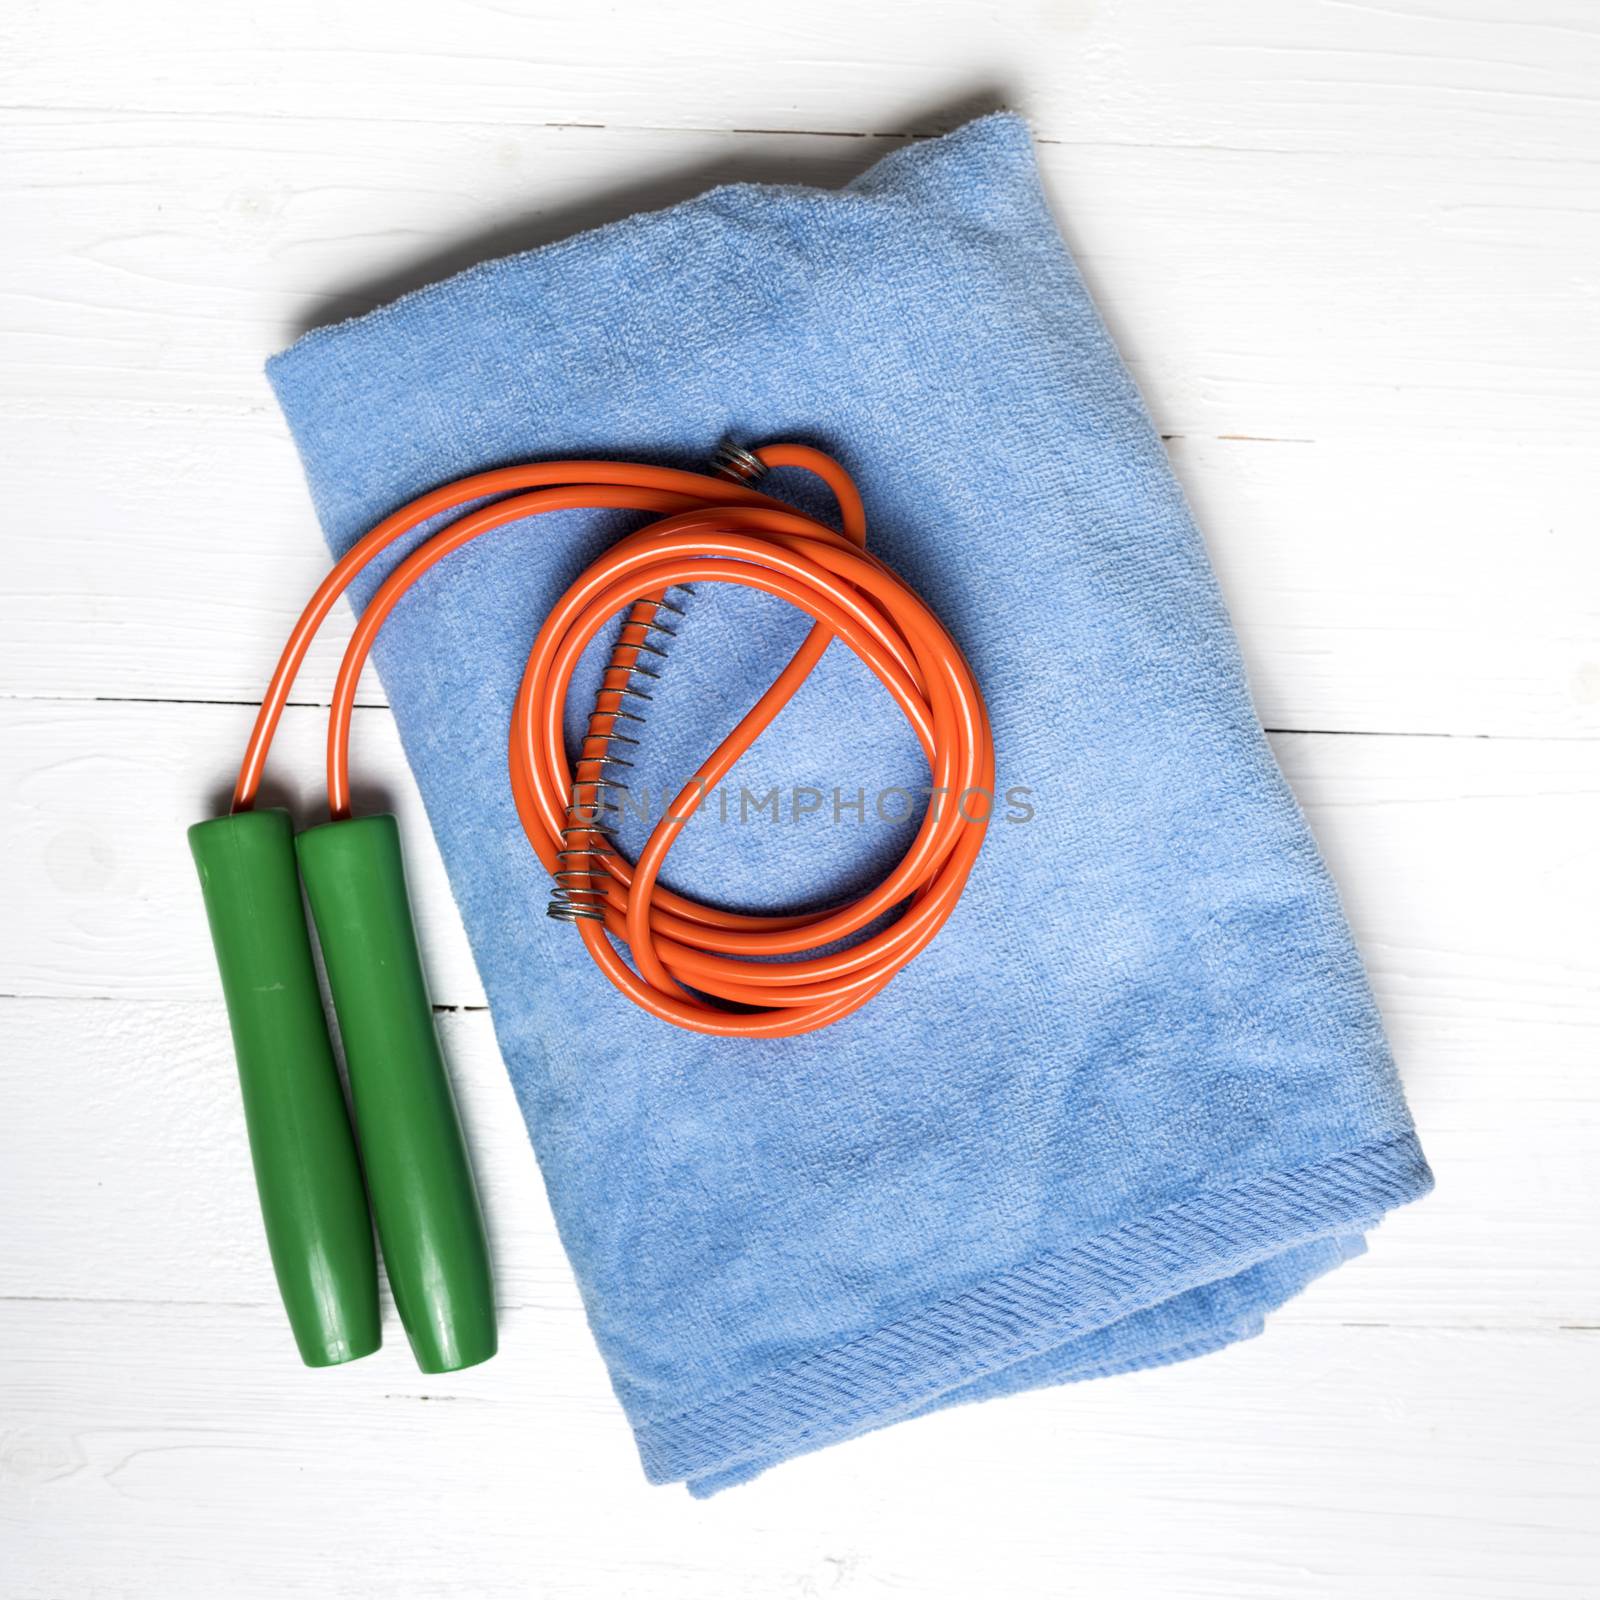 fitness equipment:blue towel,jumping rope on white wood table